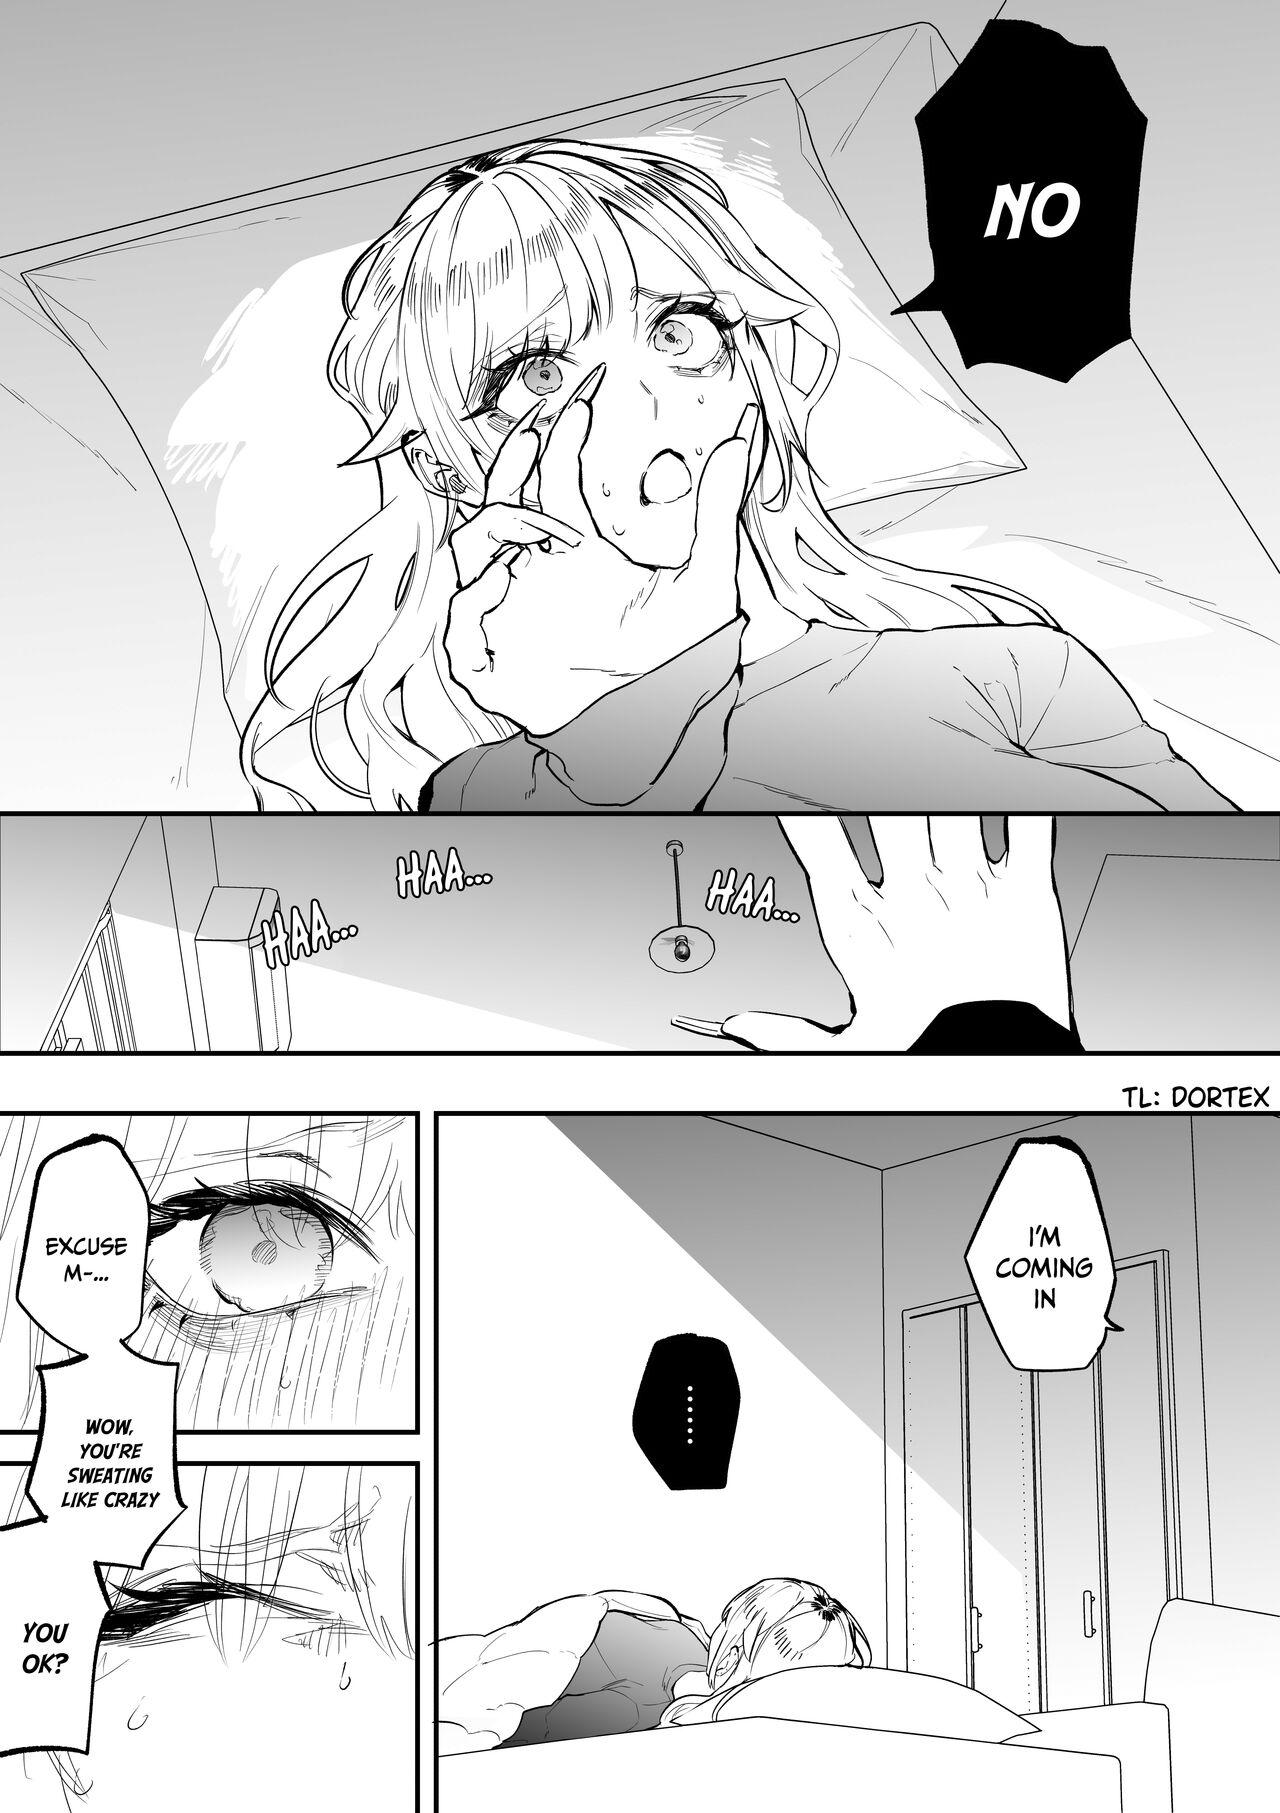 Women Sucking Dicks The Day I Decided to Make My Cheeky Gyaru Sister Understand in My Own Way (Fanbox 18+ Content) - Ch. 2.6 - In a Dream - Original Blowjob Contest - Page 4